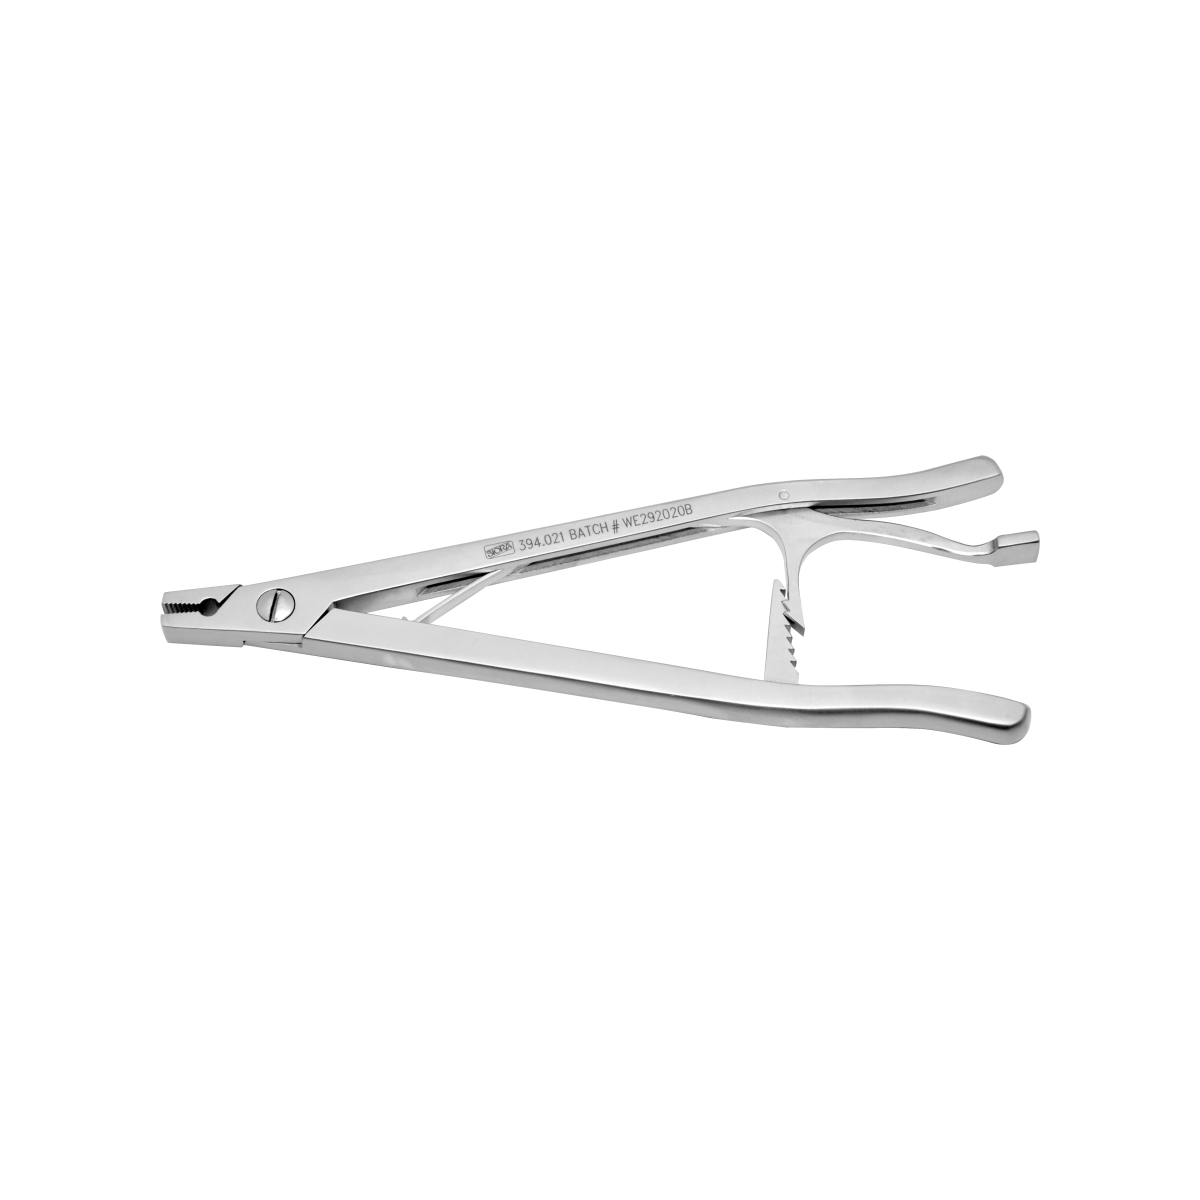 Locking-Plier-With-Ratchet-lock-Length-205mm.png